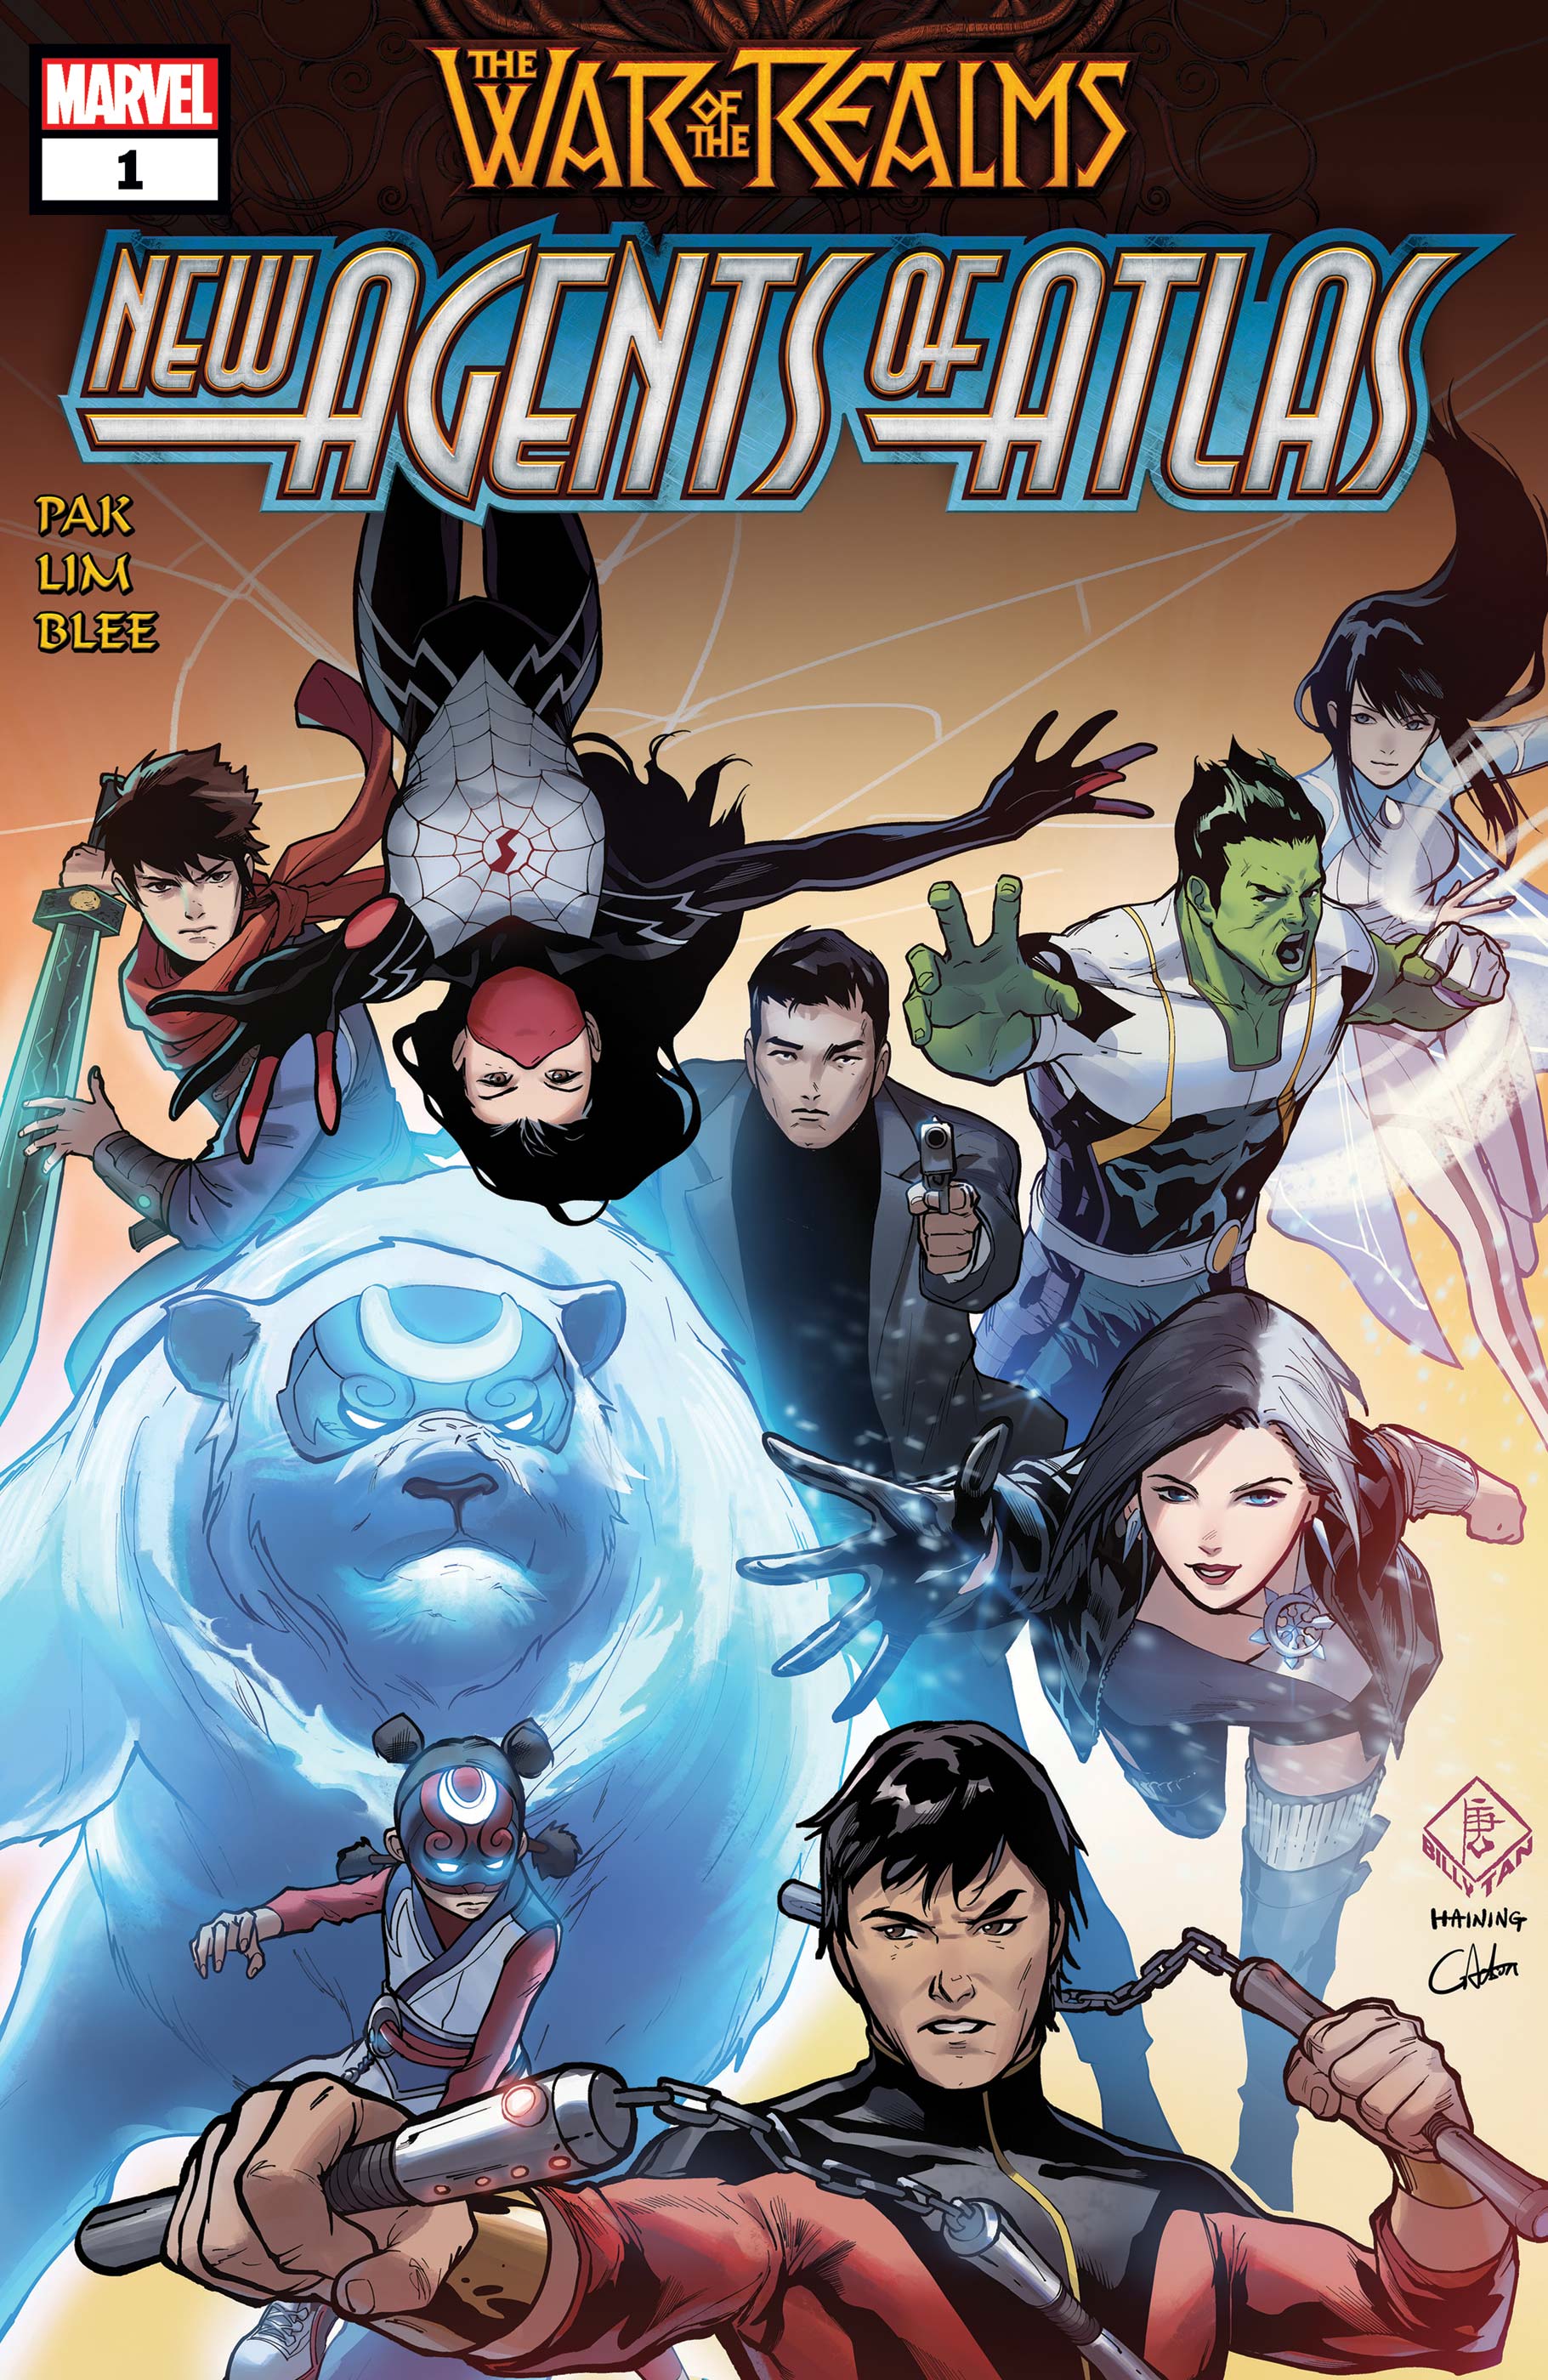 War of the Realms: New Agents of Atlas (2019) #1